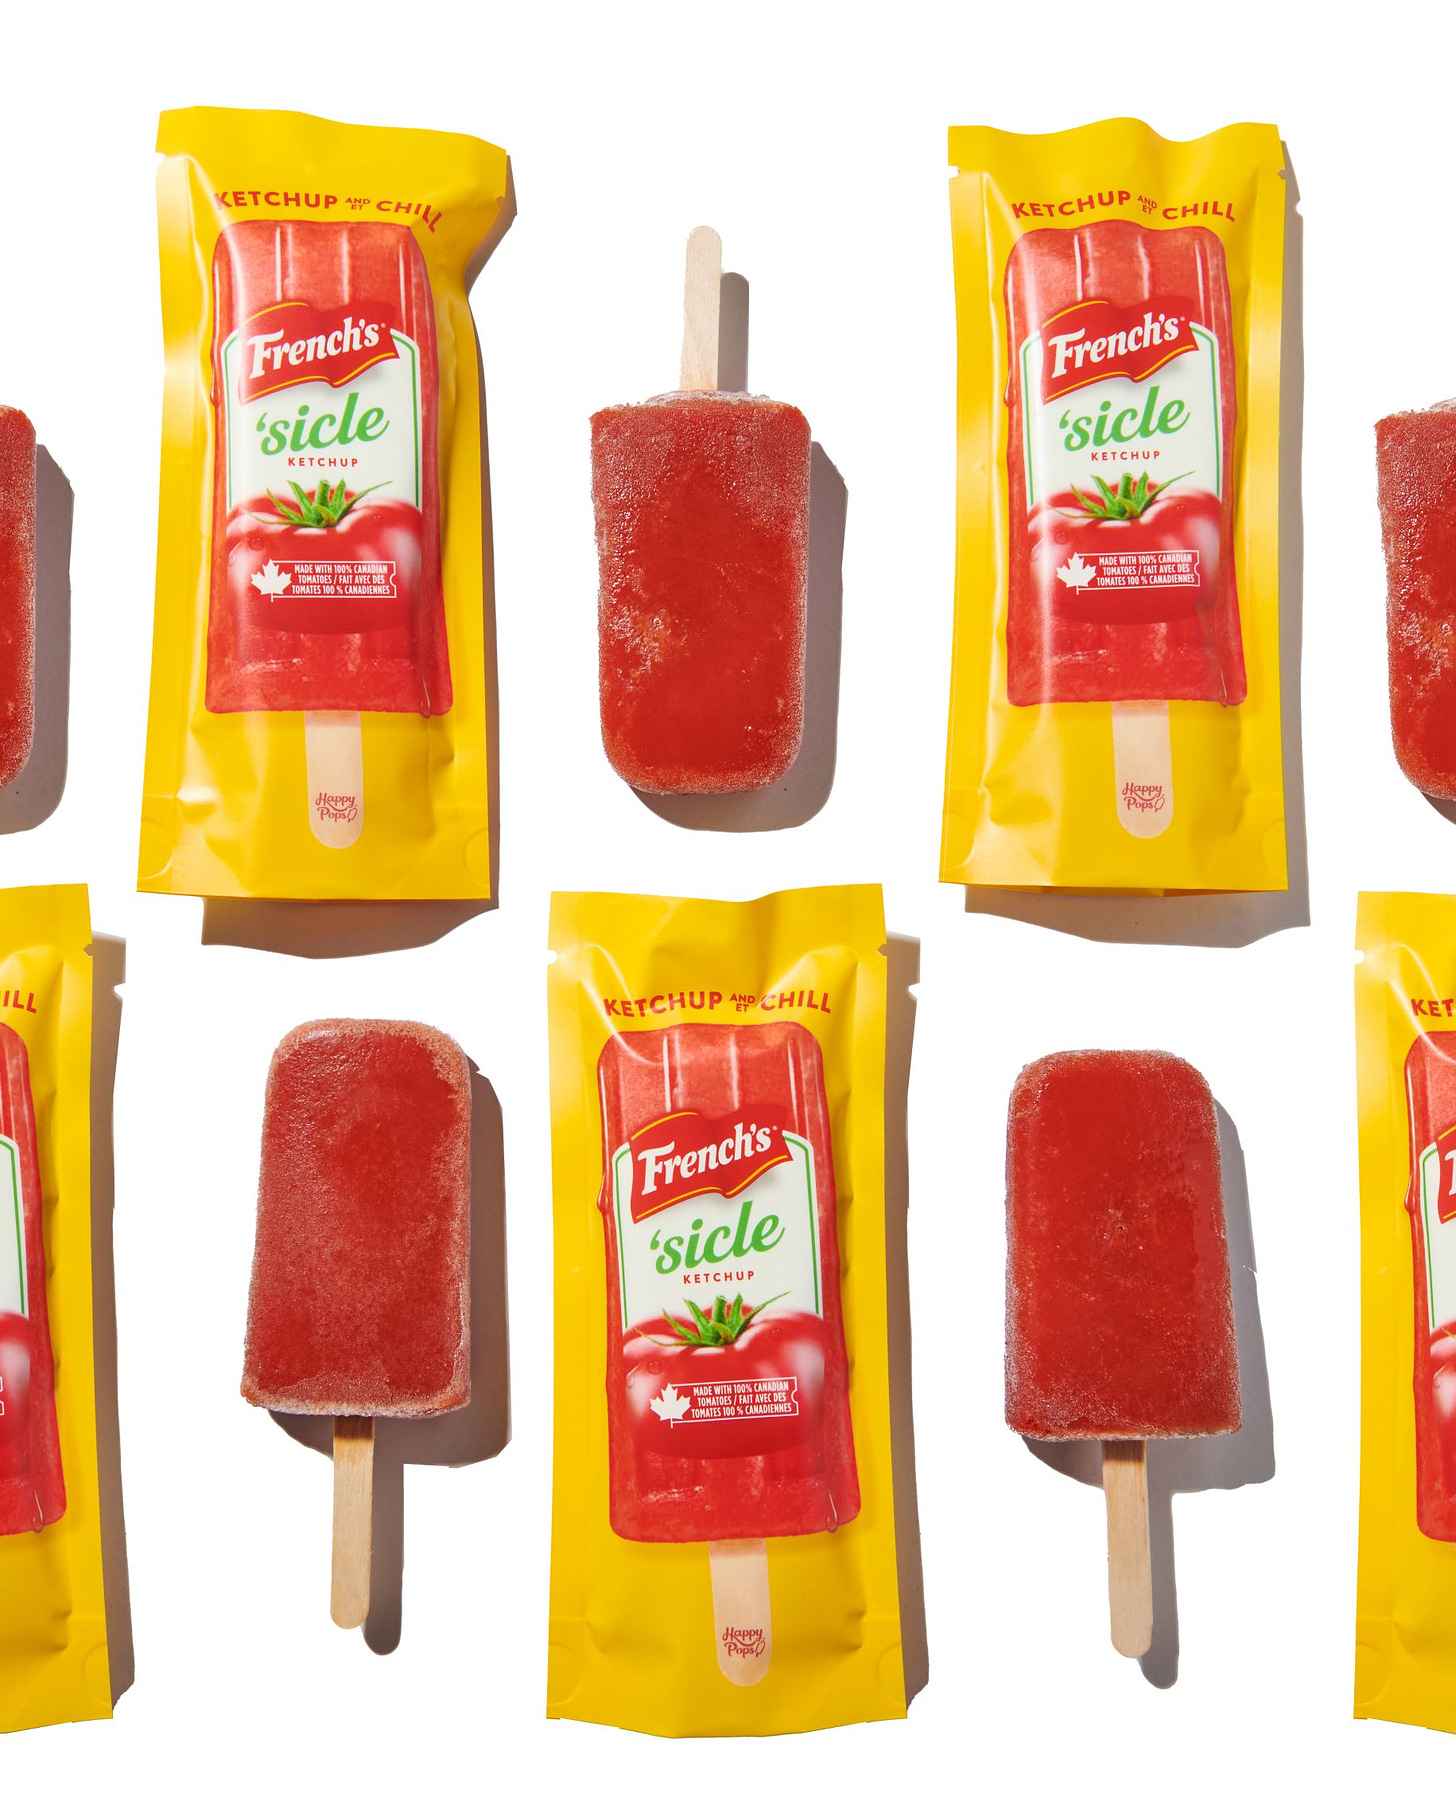 A commercial illustration of blood red popsicles along with packages of French's 'sicle popsicles in yellow bags